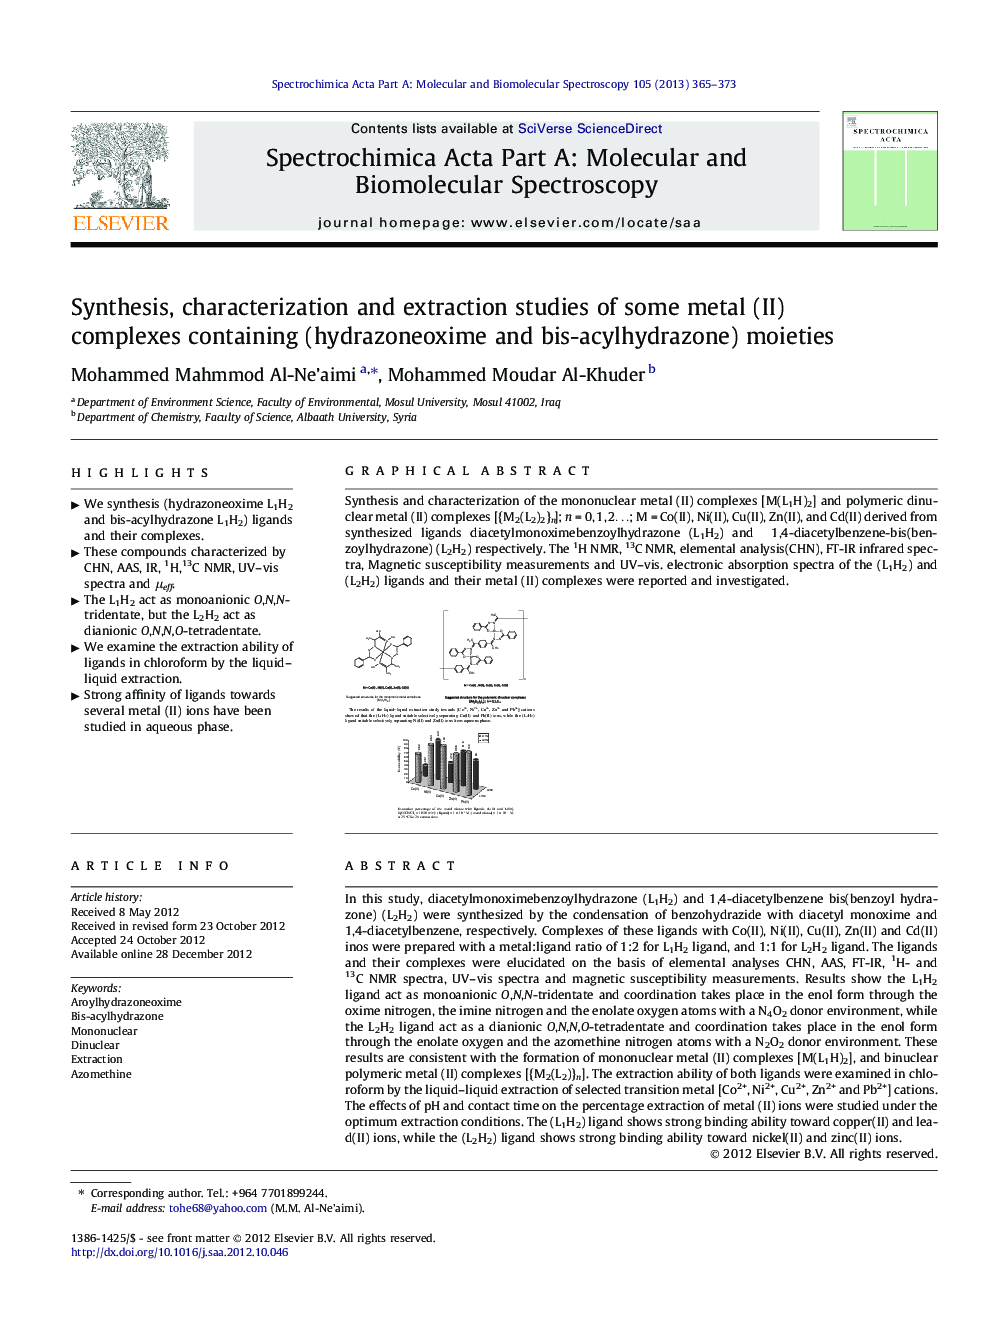 Synthesis, characterization and extraction studies of some metal (II) complexes containing (hydrazoneoxime and bis-acylhydrazone) moieties